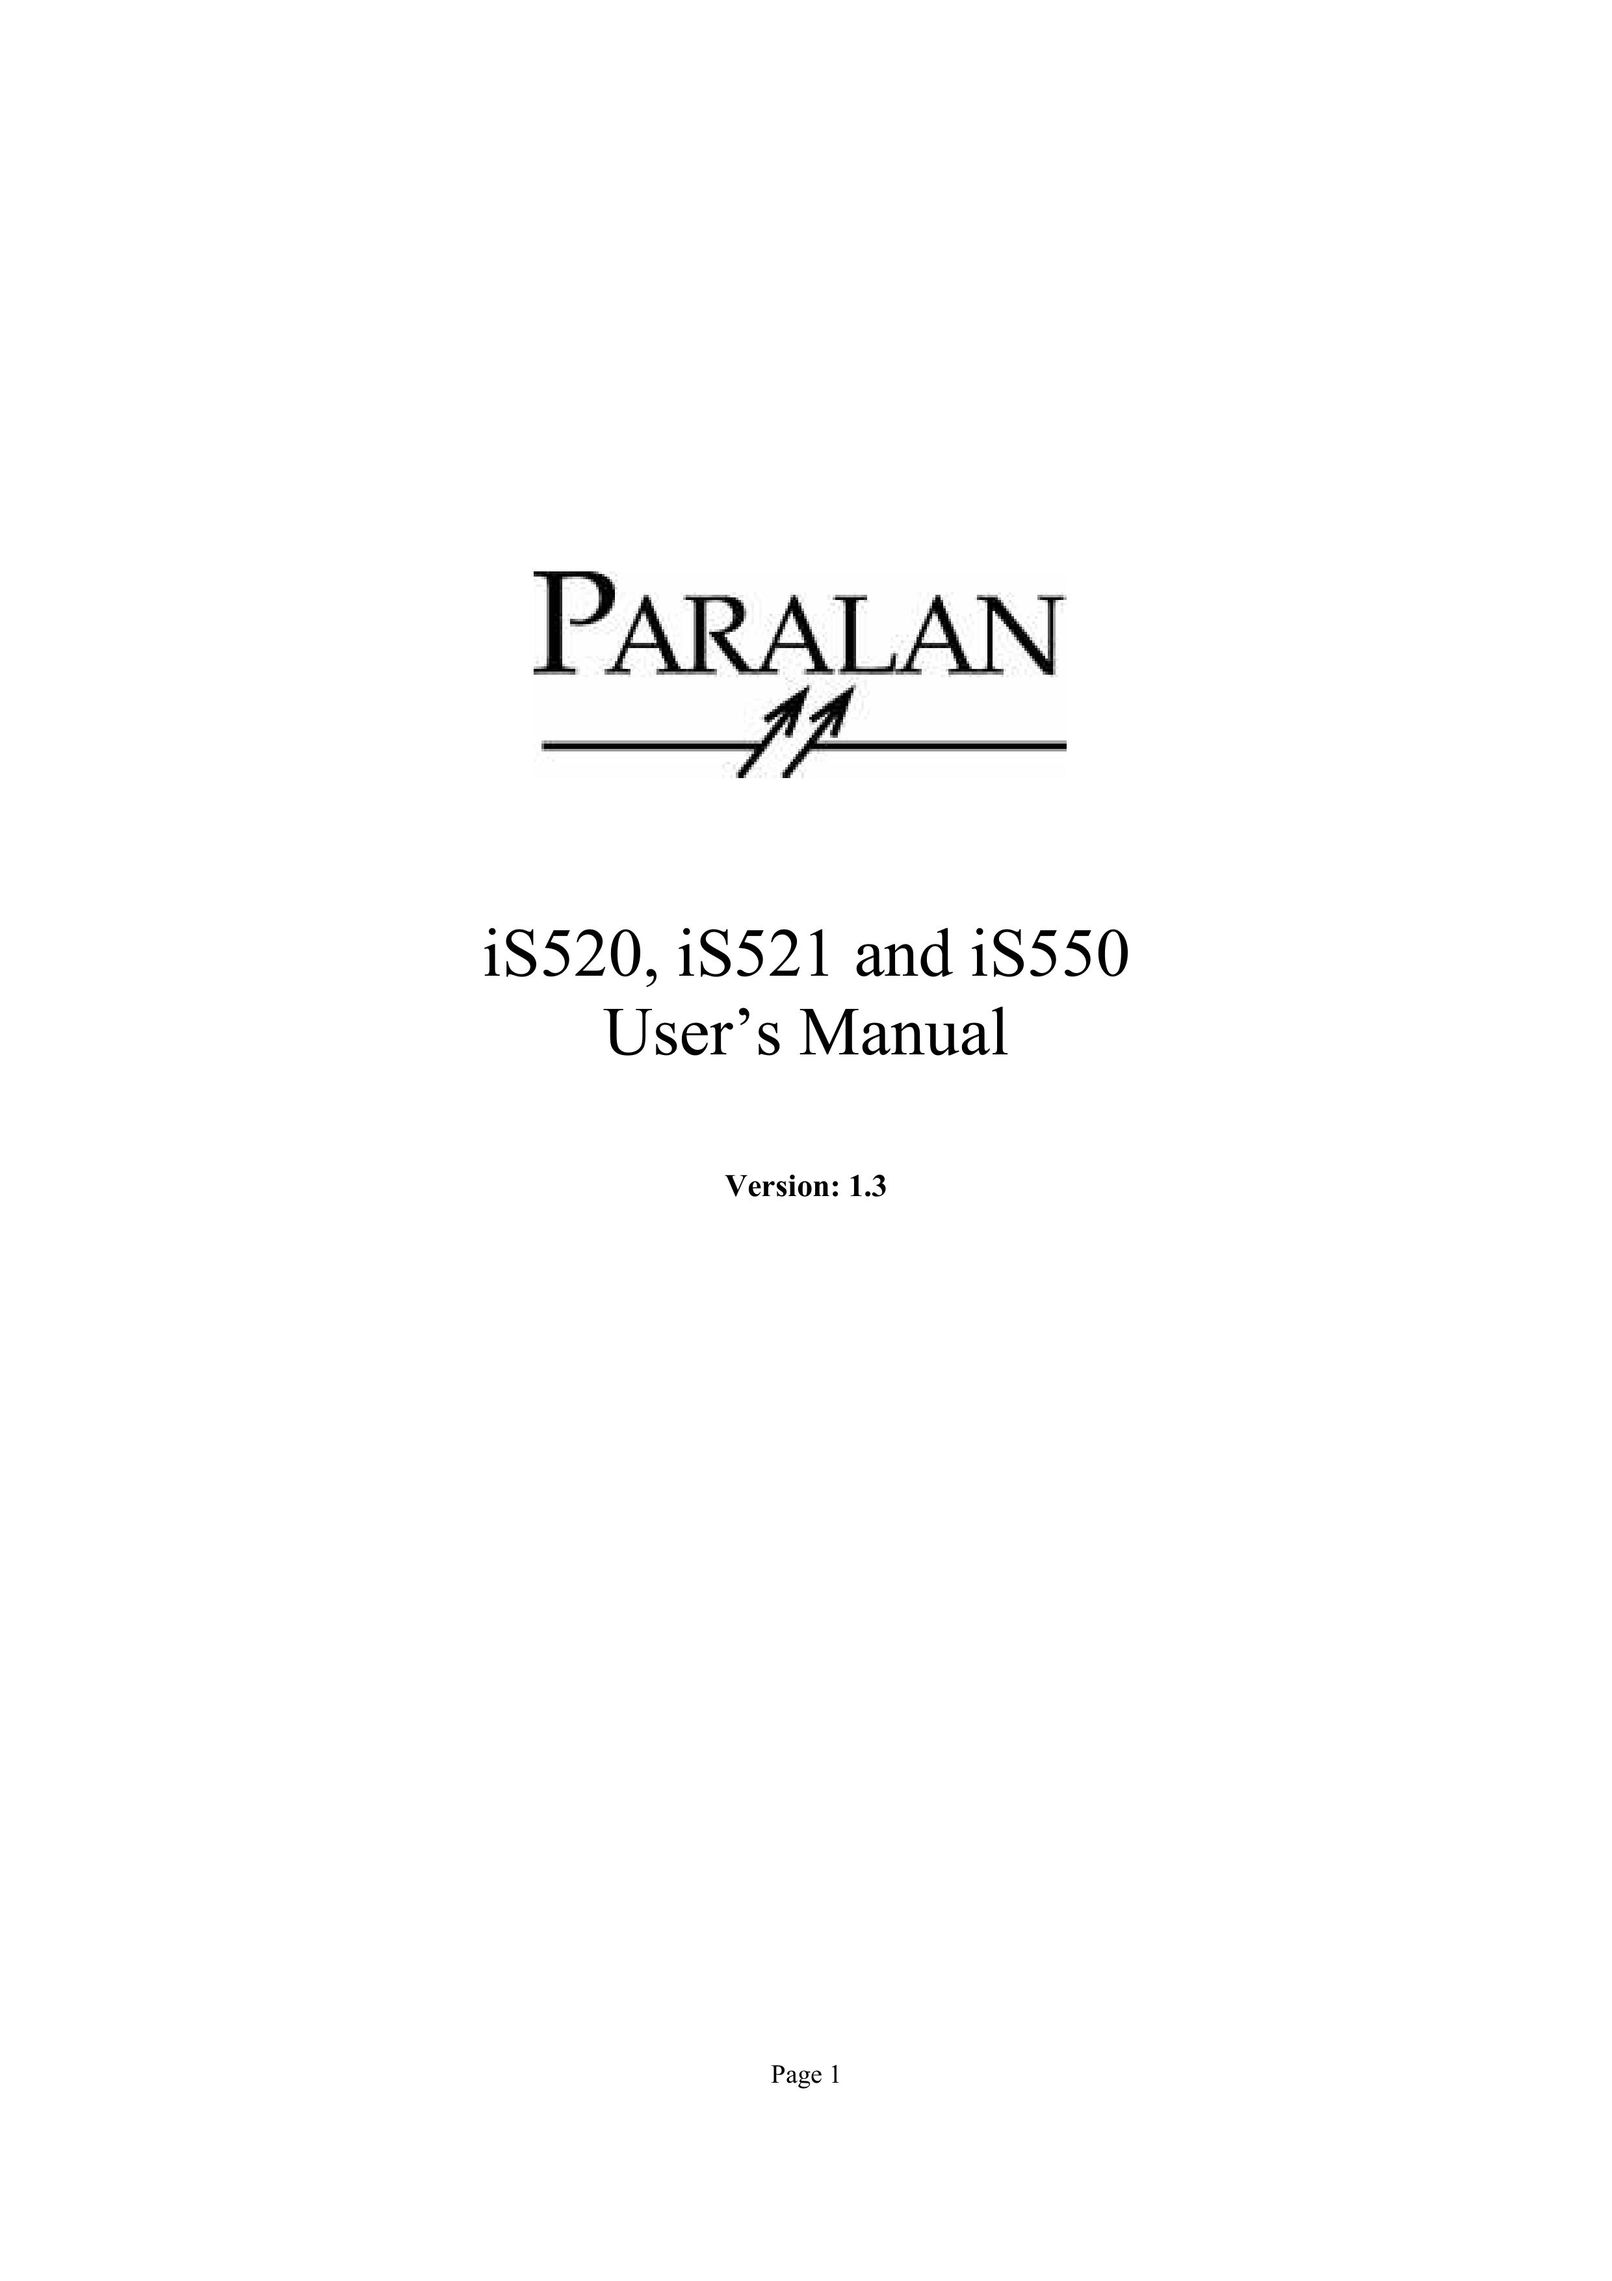 Paralan iS550 Switch User Manual